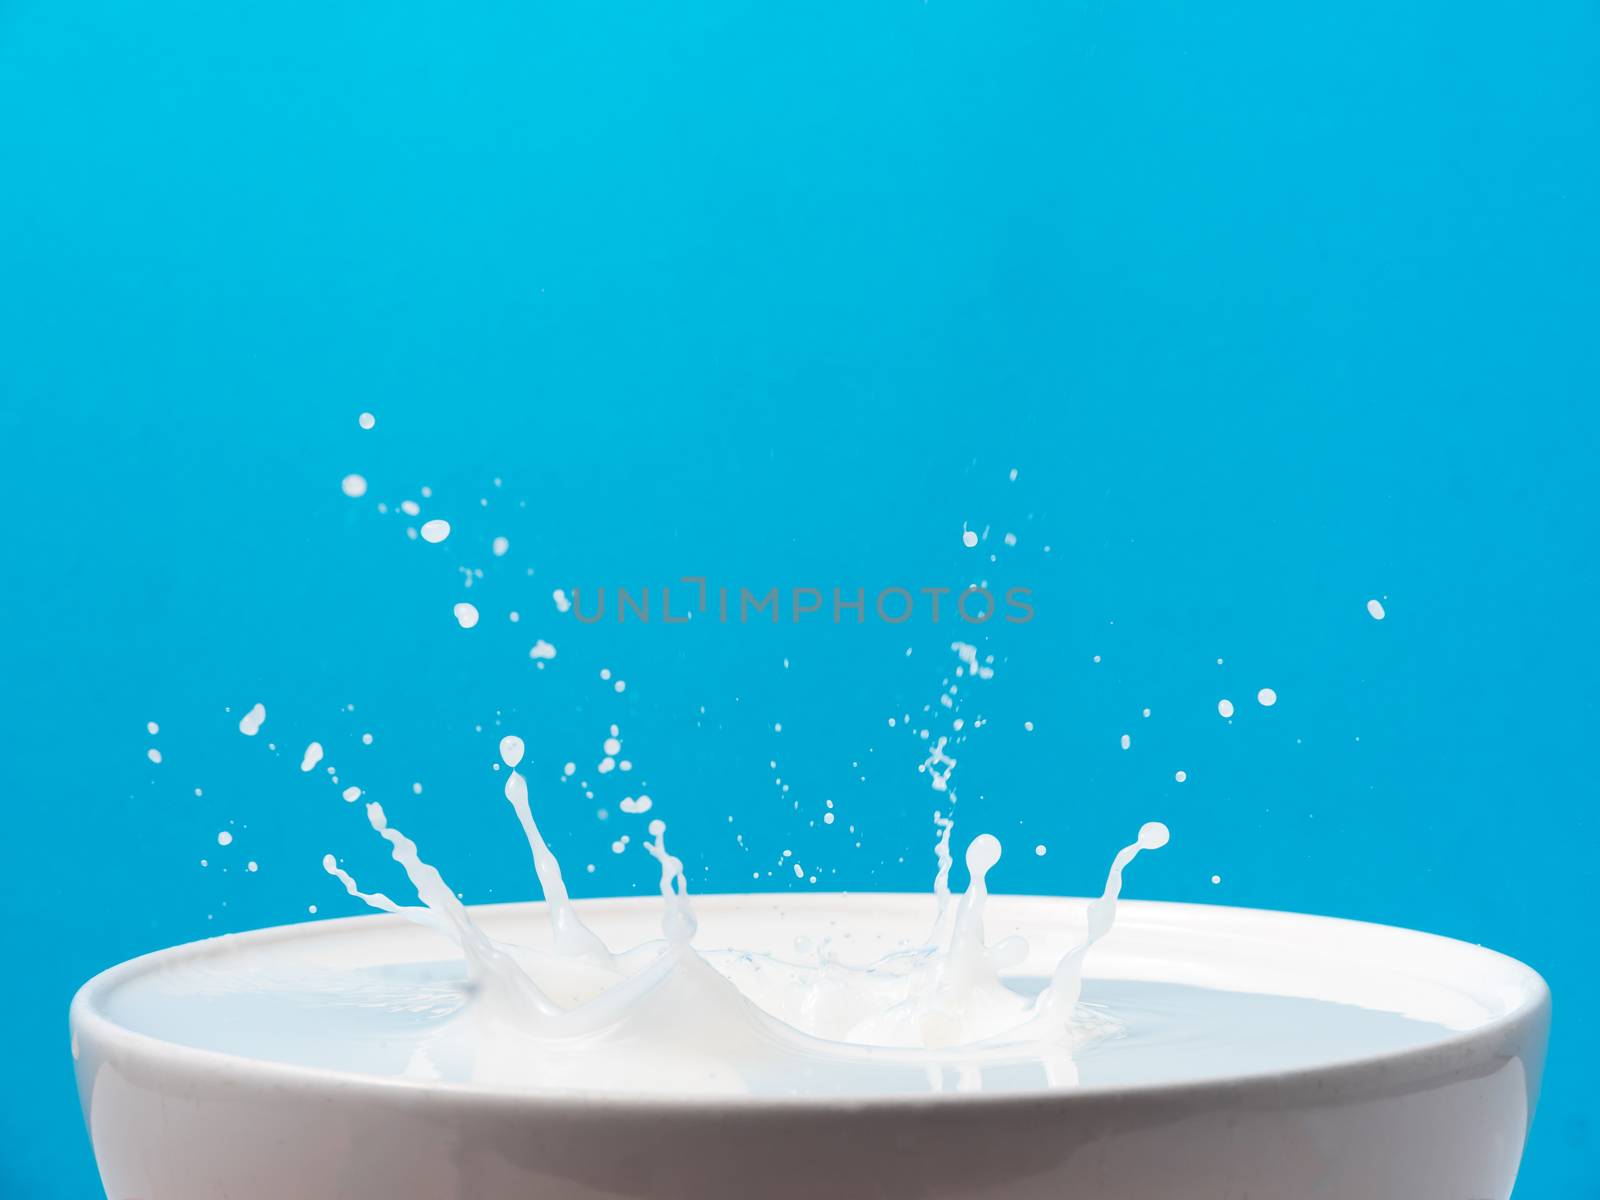 Splash of milk from a cup on blue background. by ronnarong